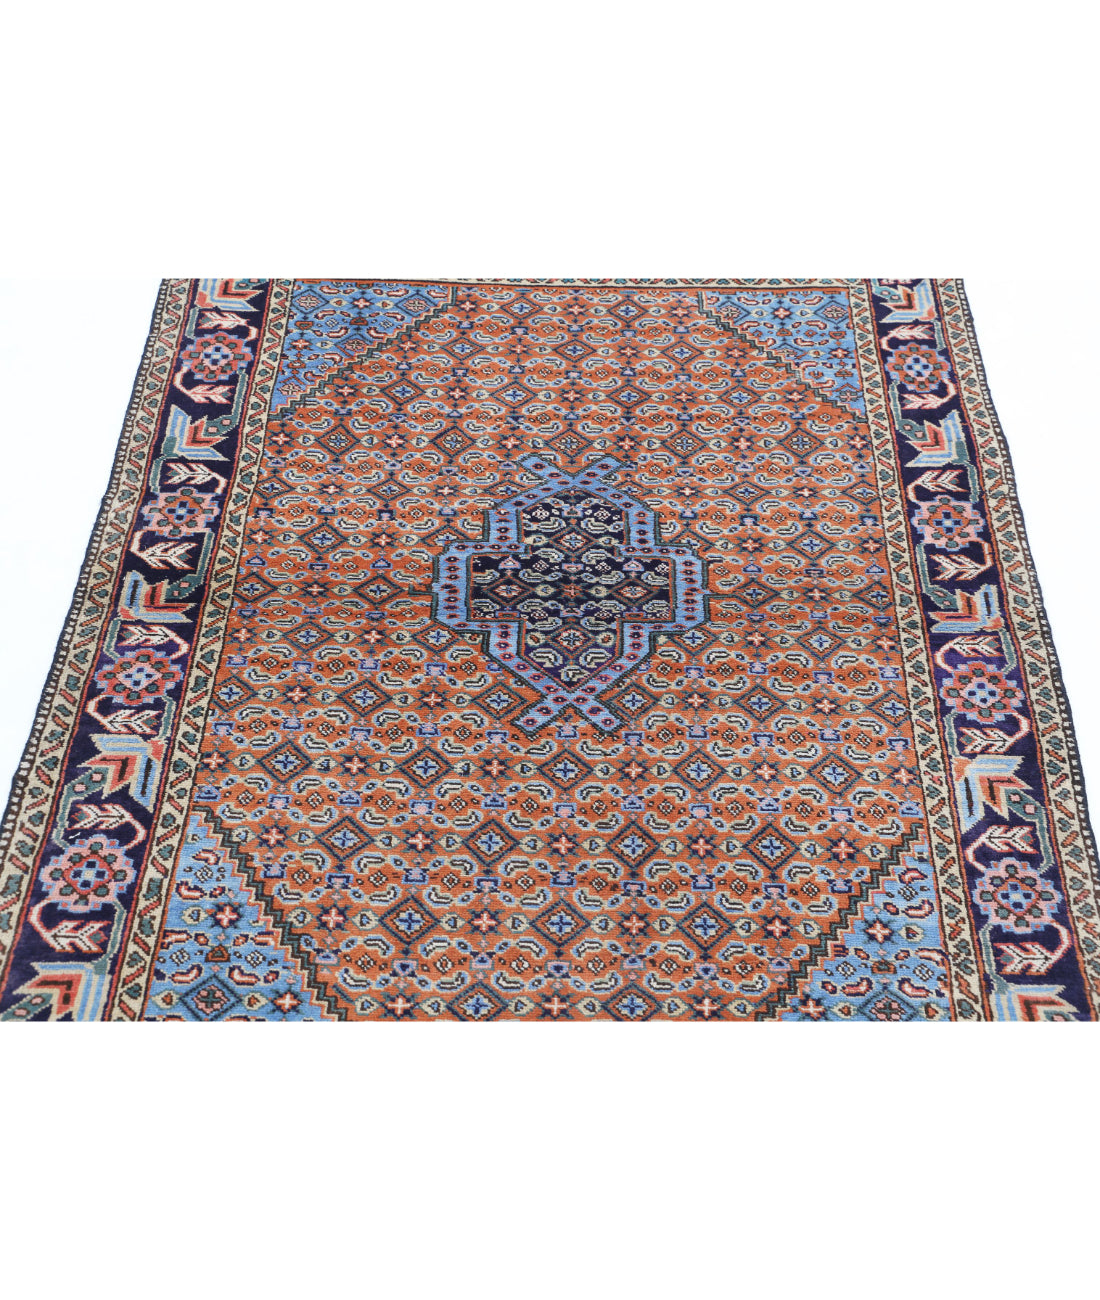 Hand Knotted Persian Moud Wool Rug - 3'7'' x 4'10'' 3'7'' x 4'10'' (108 X 145) / Brown / Blue